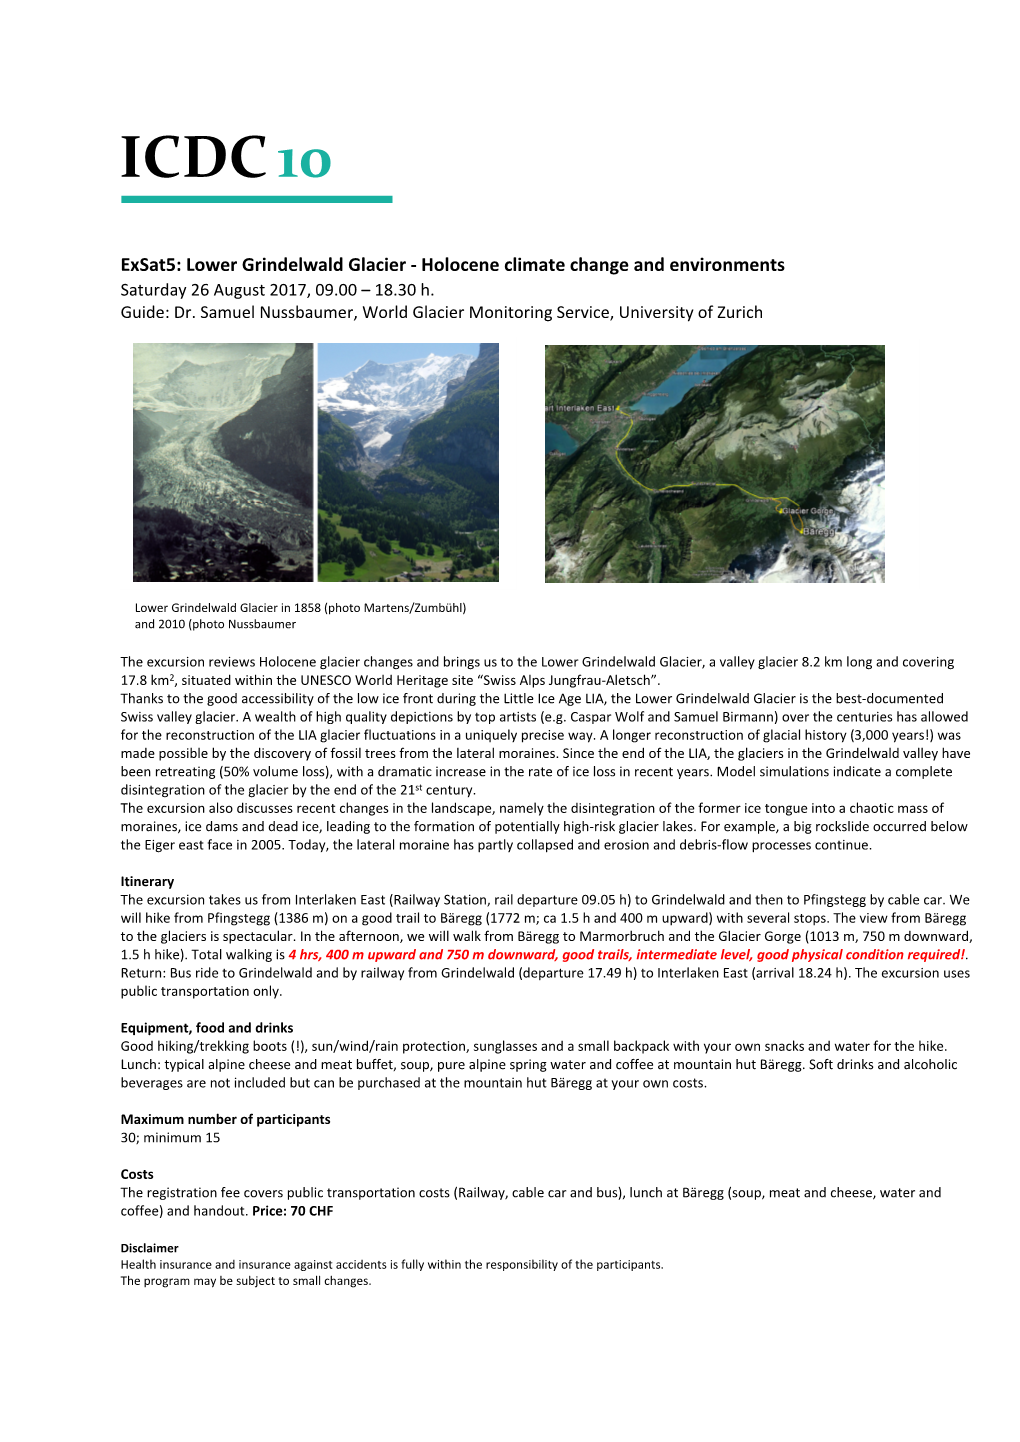 Lower Grindelwald Glacier ‐ Holocene Climate Change and Environments Saturday 26 August 2017, 09.00 – 18.30 H